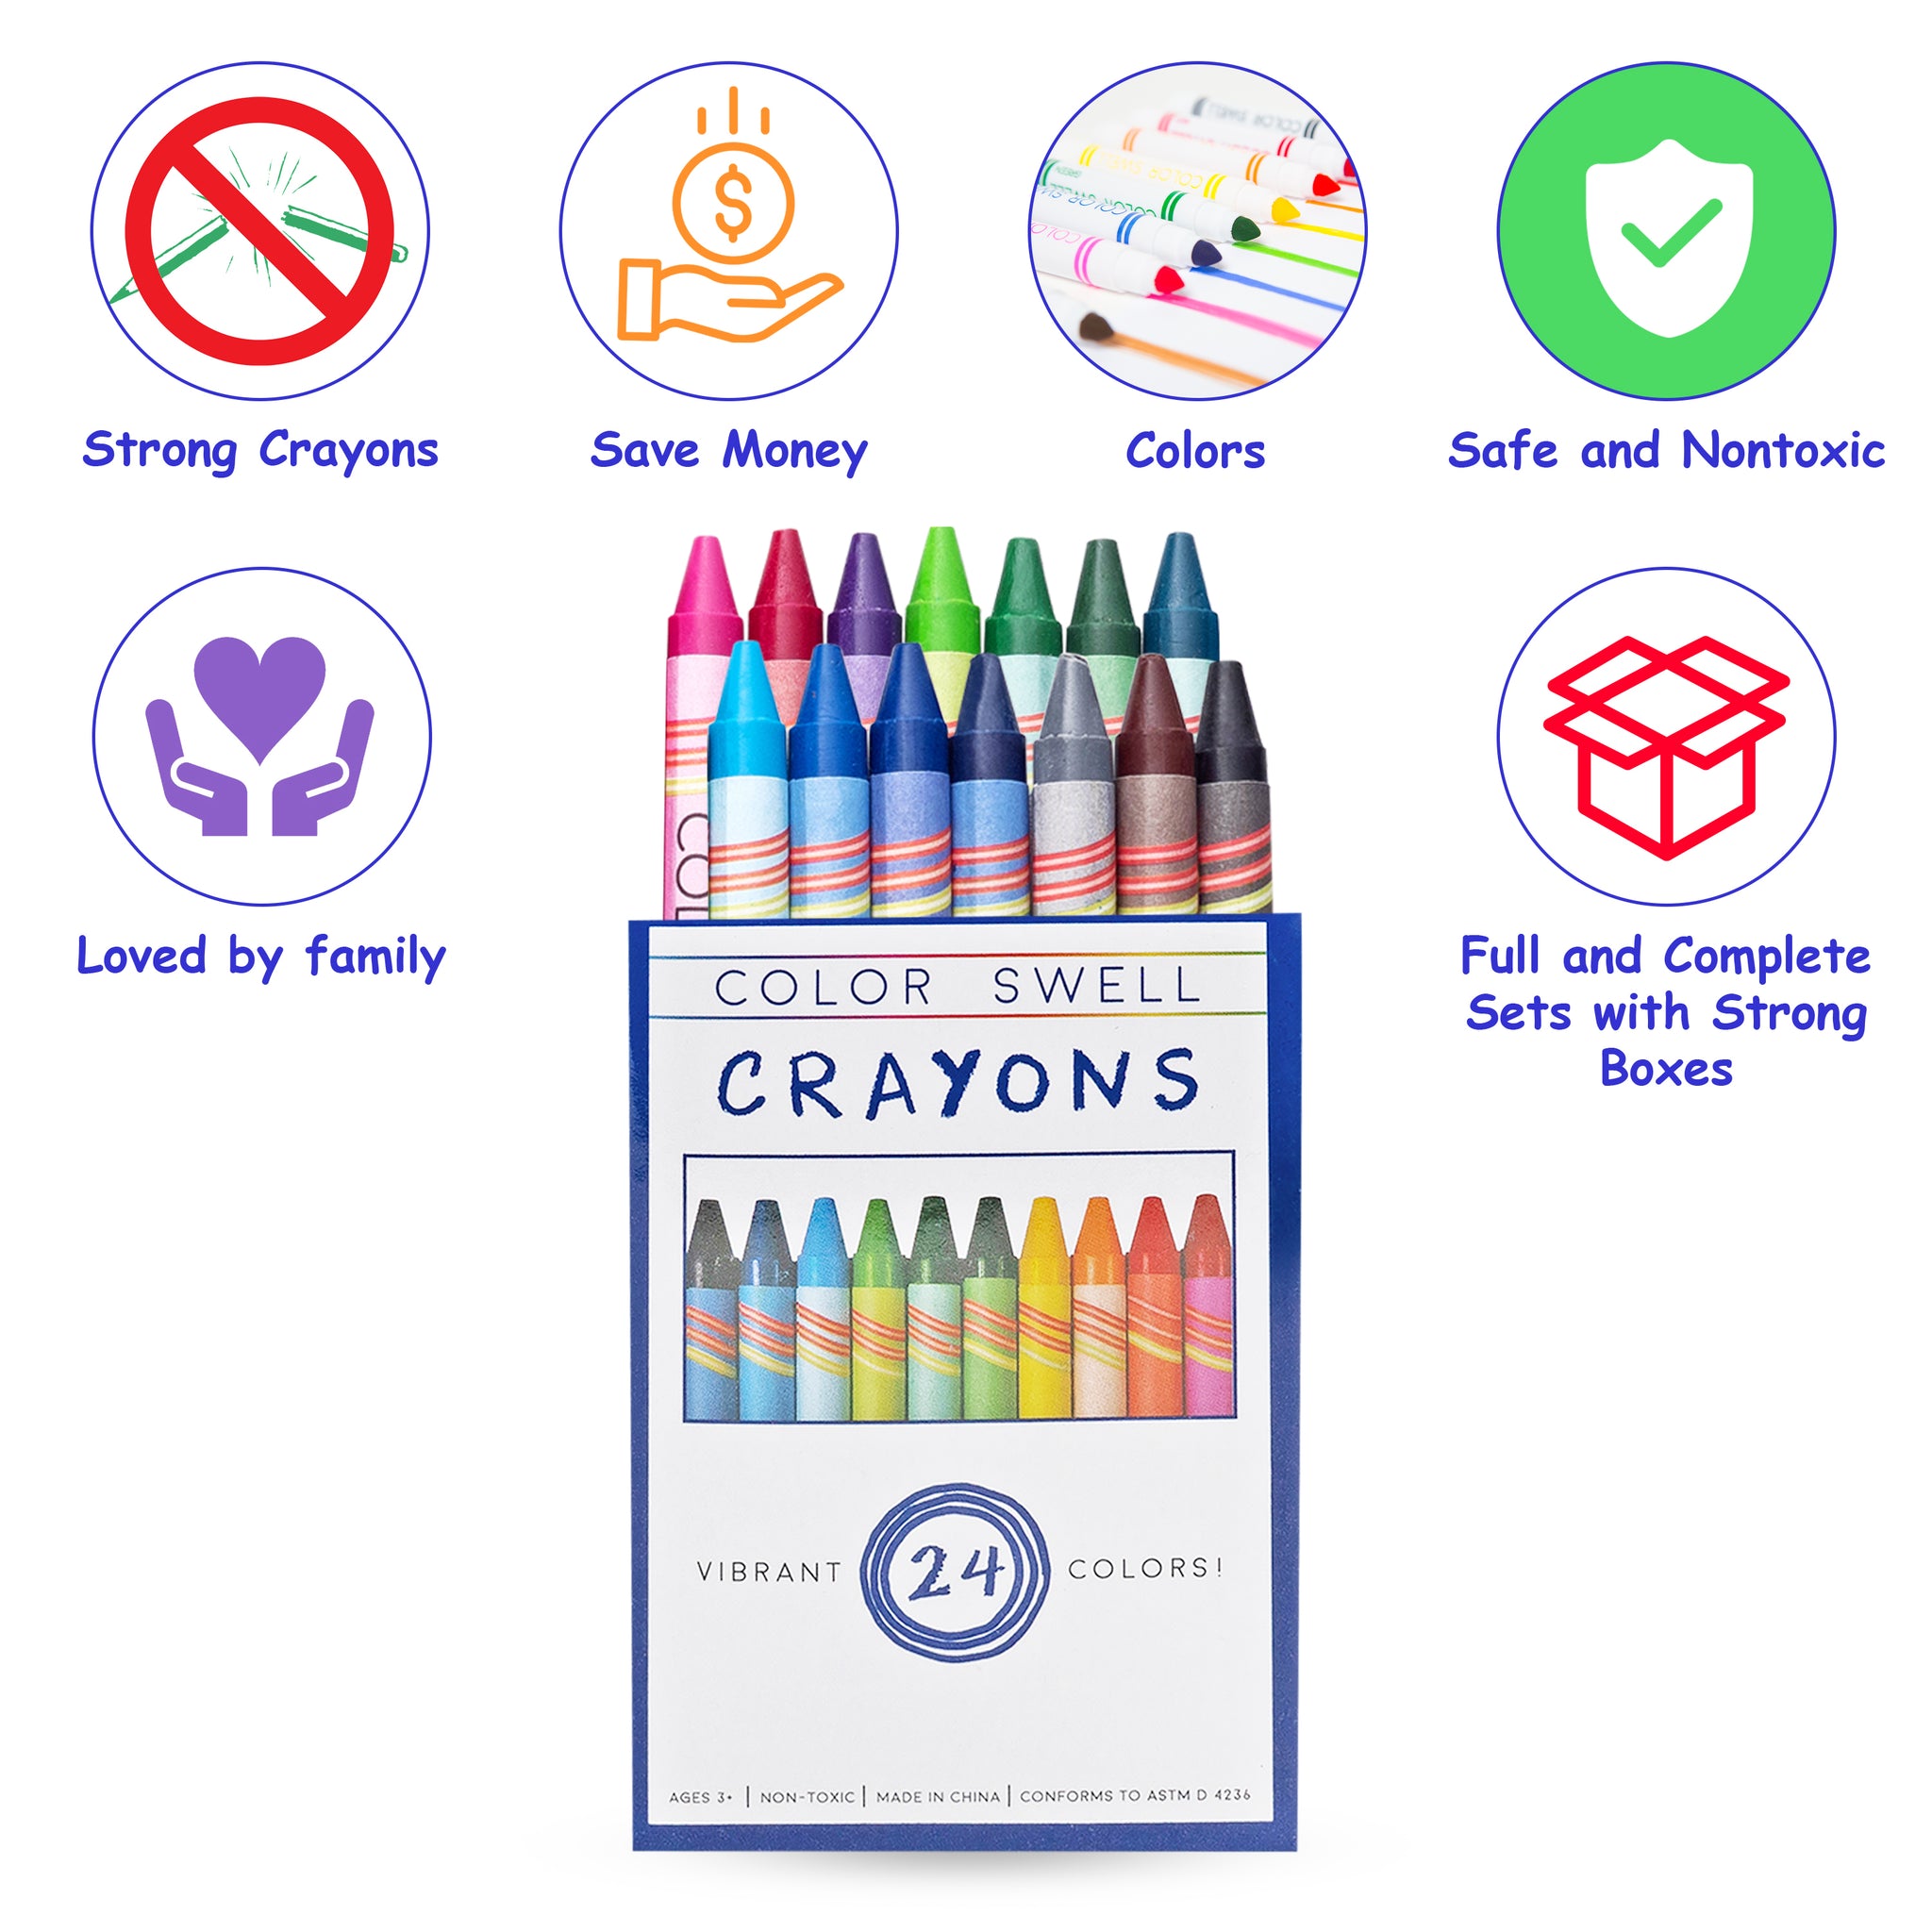 2 Pack of Crayons with Crayon Box, Crayons 24 Count, Assorted Colors -  Crayons Bulk, Crayons Bulk for Classroom, School Supplies for Kids